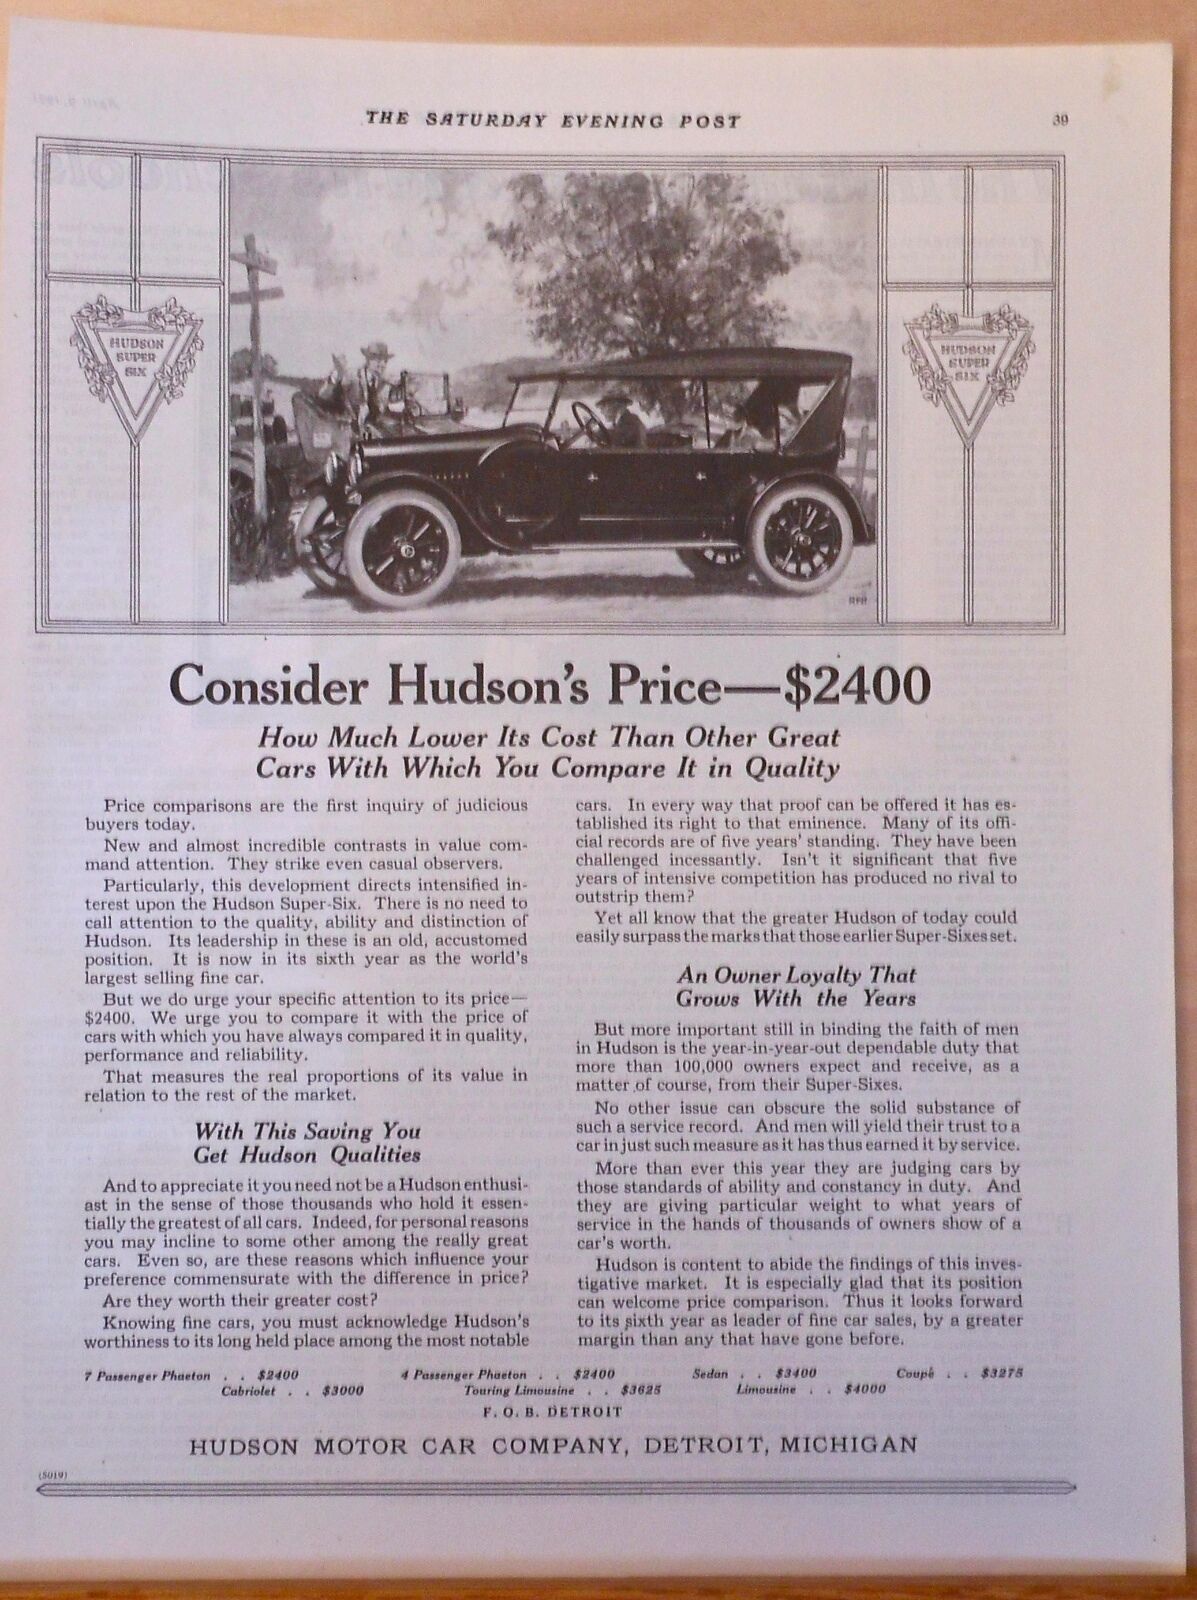 Vintage 1921 Magazine Ad For Hudson - Consider Hudson's Price, Compare Quality